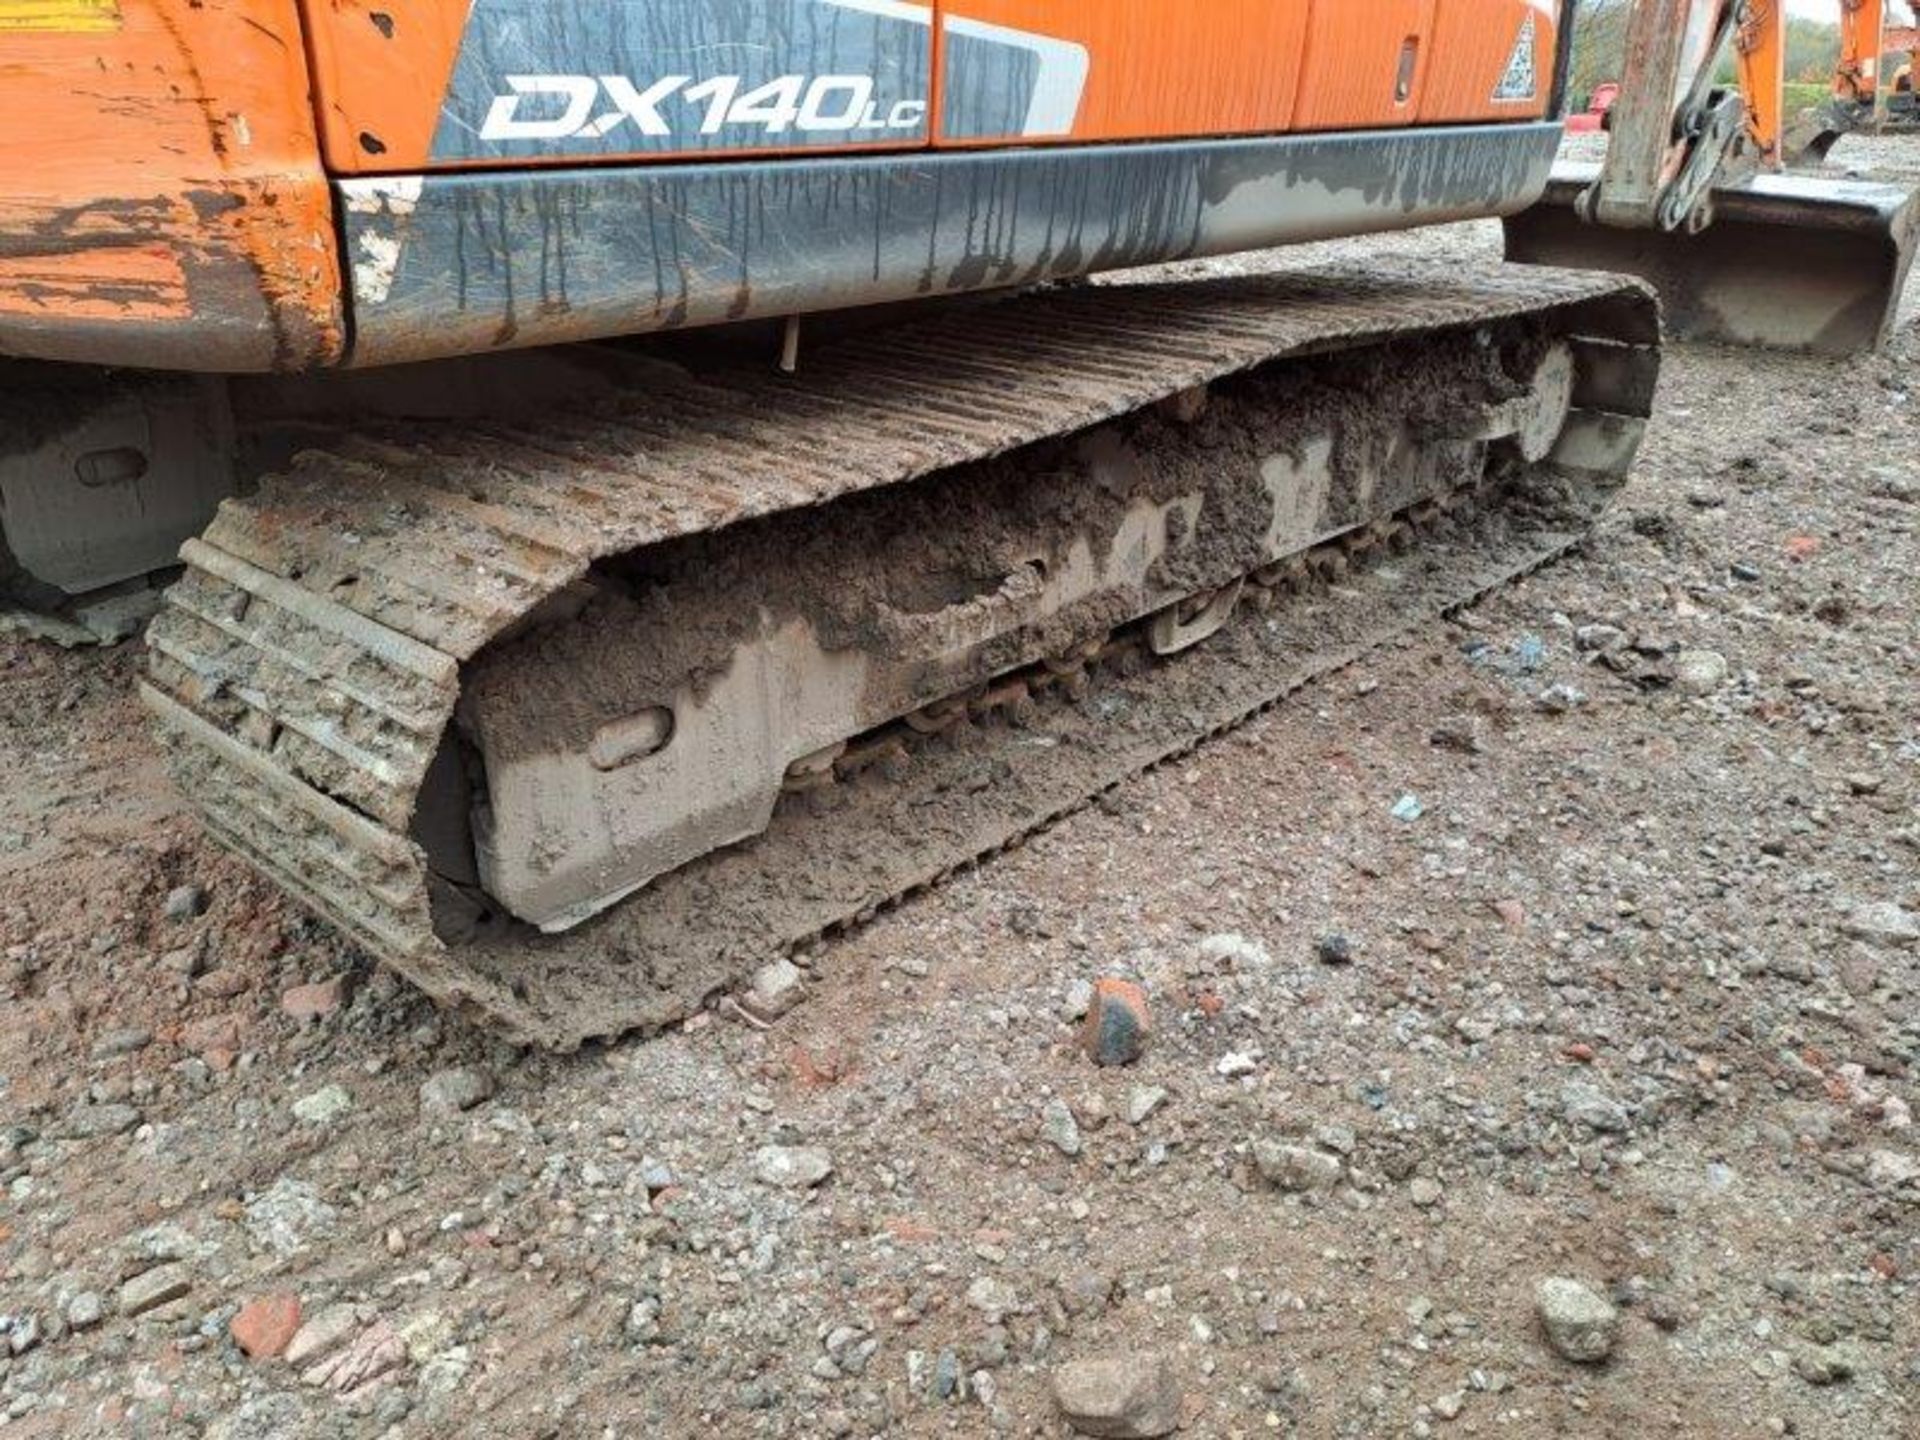 Doosan DX140LC-5 14t excavator, serial no. DHKCEBBRCH0001494, Year: 2017, Hours: 7,418, Key: 1, with - Image 8 of 18